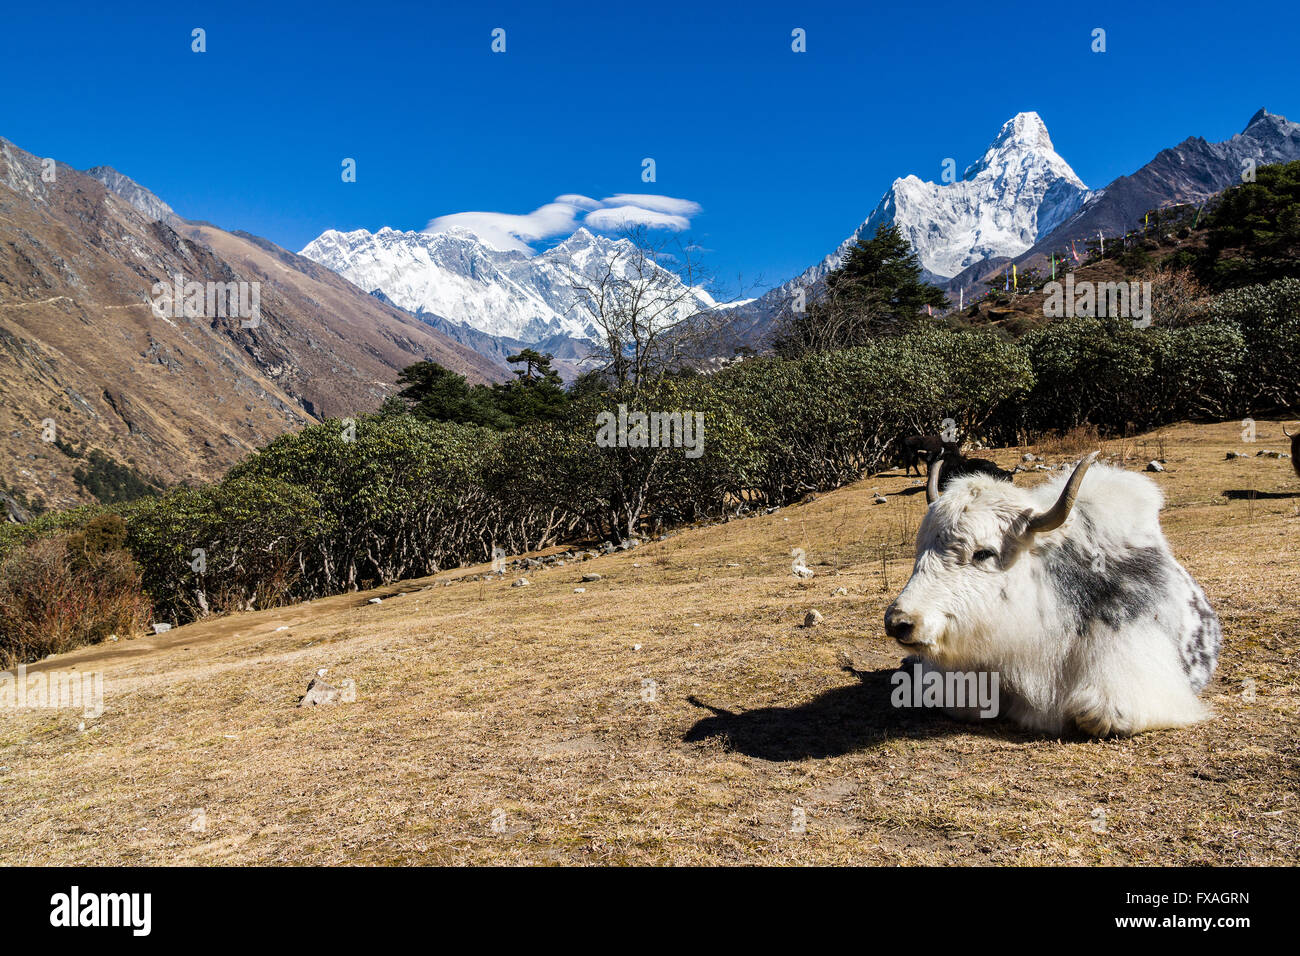 White yak (Bos mutus) lying in a meadow, Mt. Everest and Ama Dablam in the distance, Tengboche, Solo Khumbu, Nepal Stock Photo